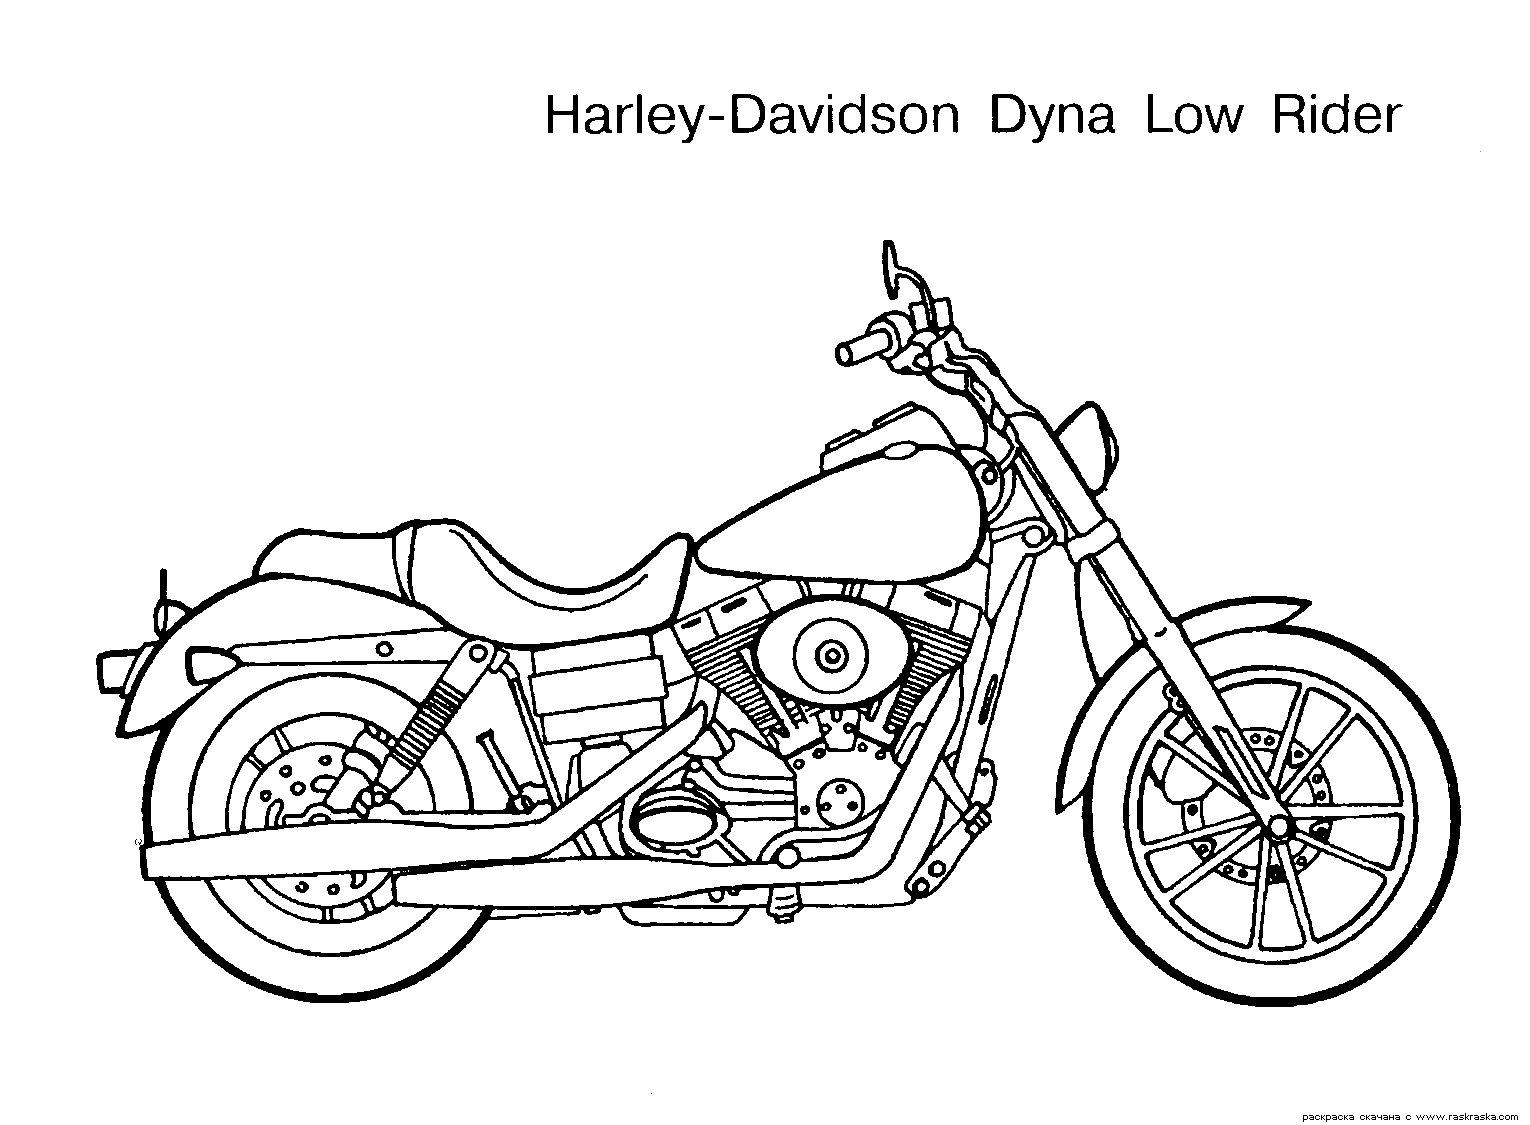 Coloring page - The motorcycle is not easy to choose